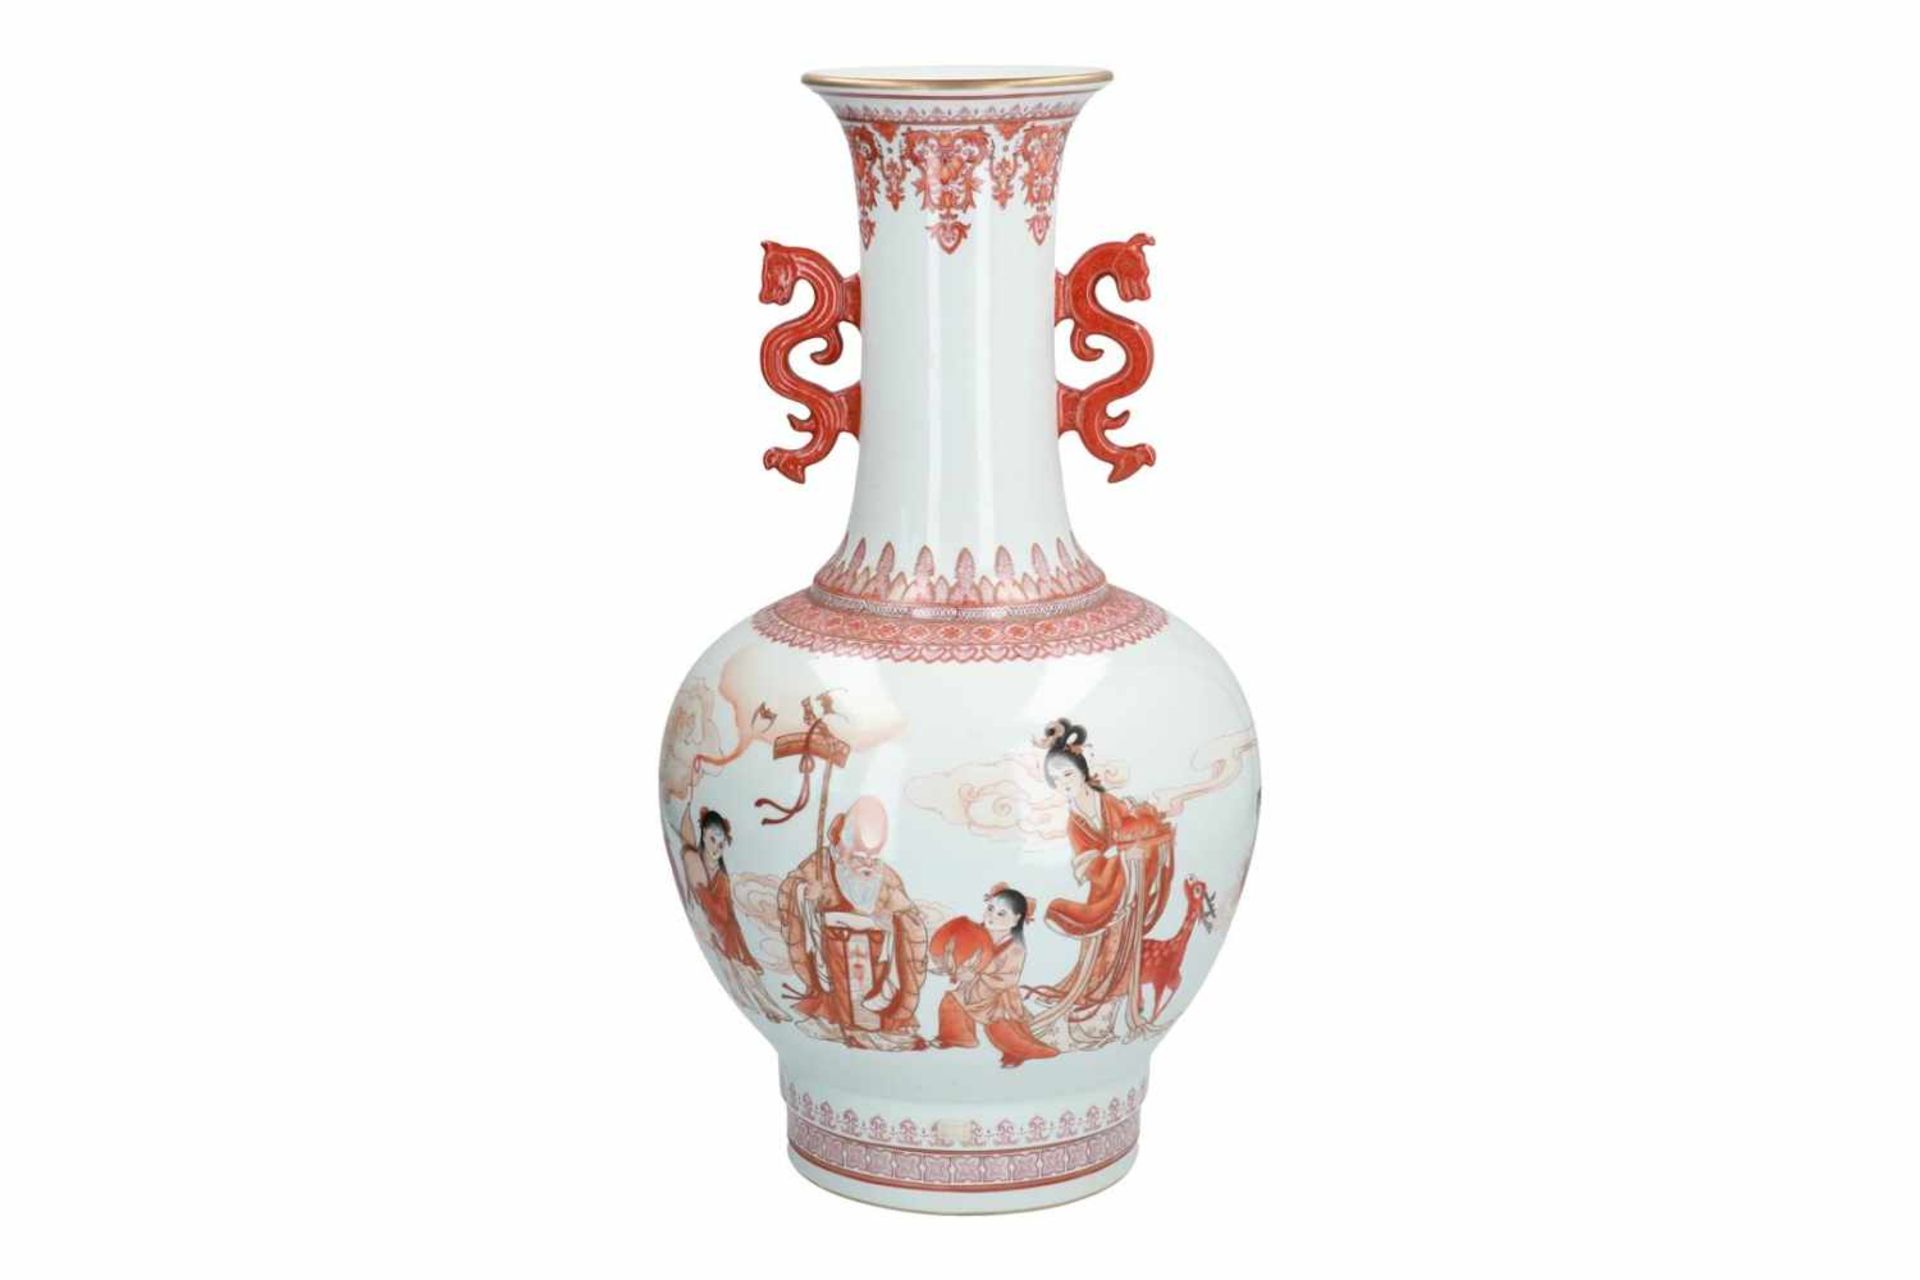 An iron red porcelain vase, decorated with dignitary, figures and a poem. The handles in the shape